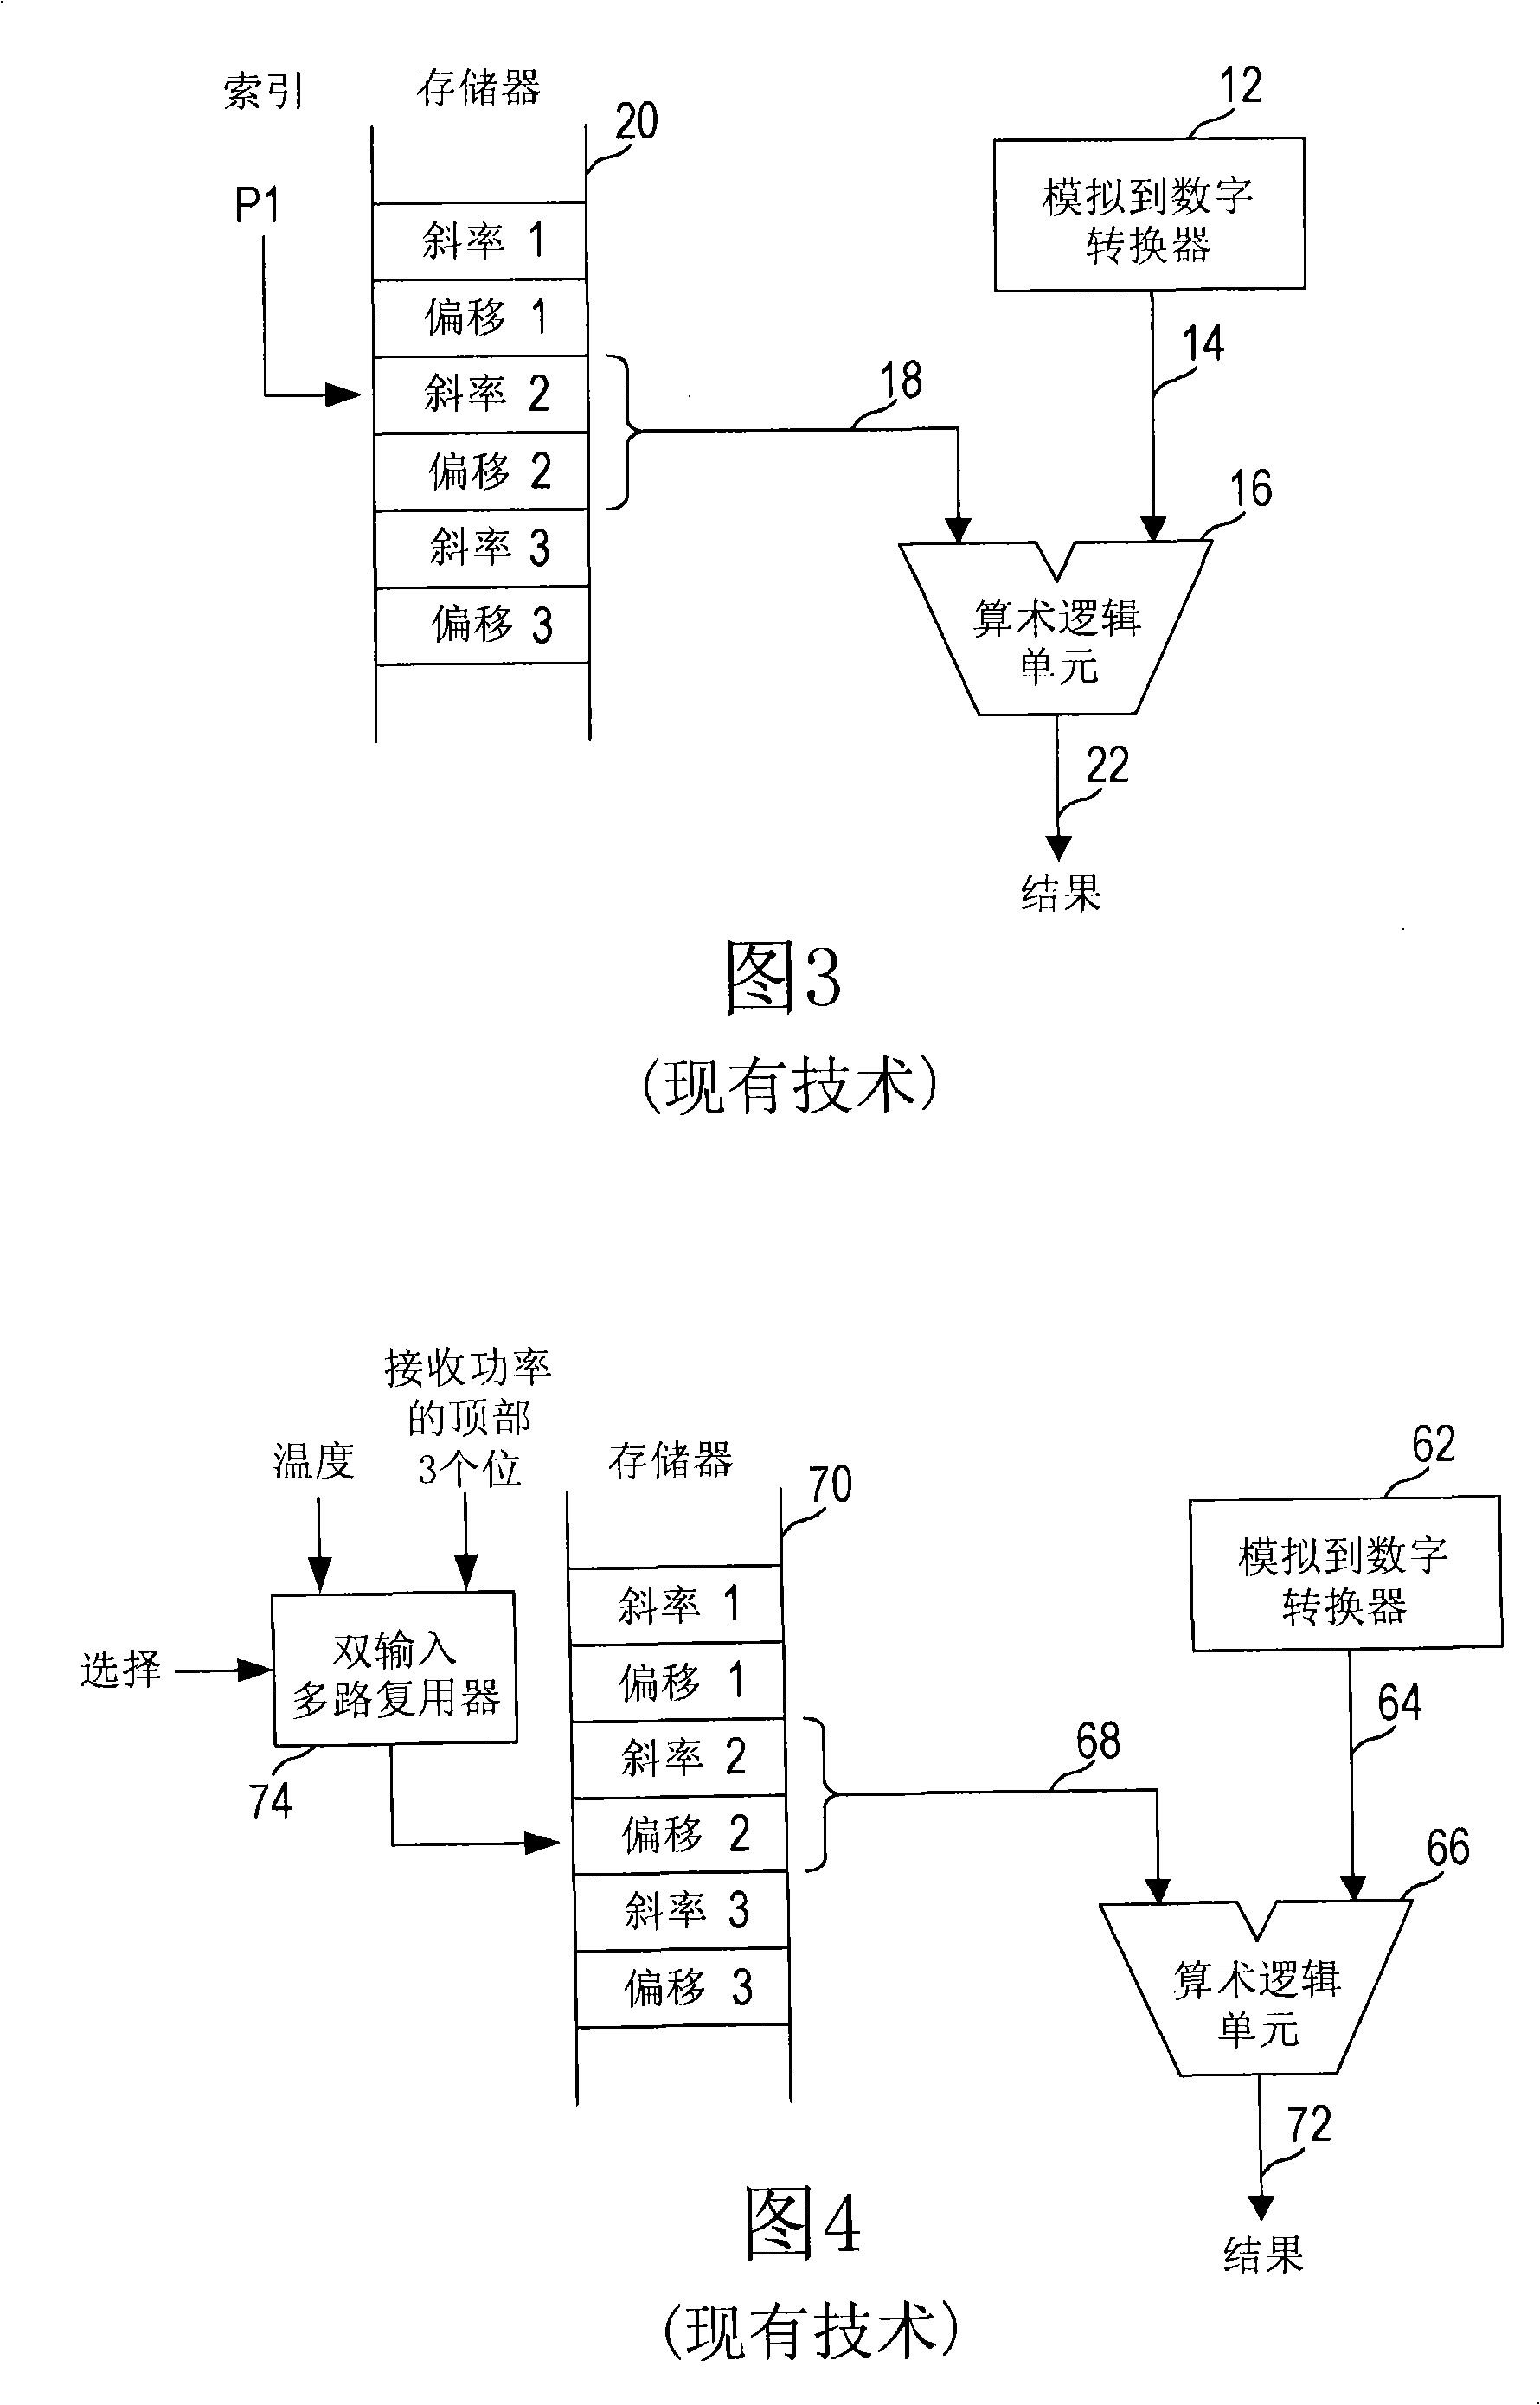 Device and method for performing nolinear numerical value conversion by means of piecewise linearity